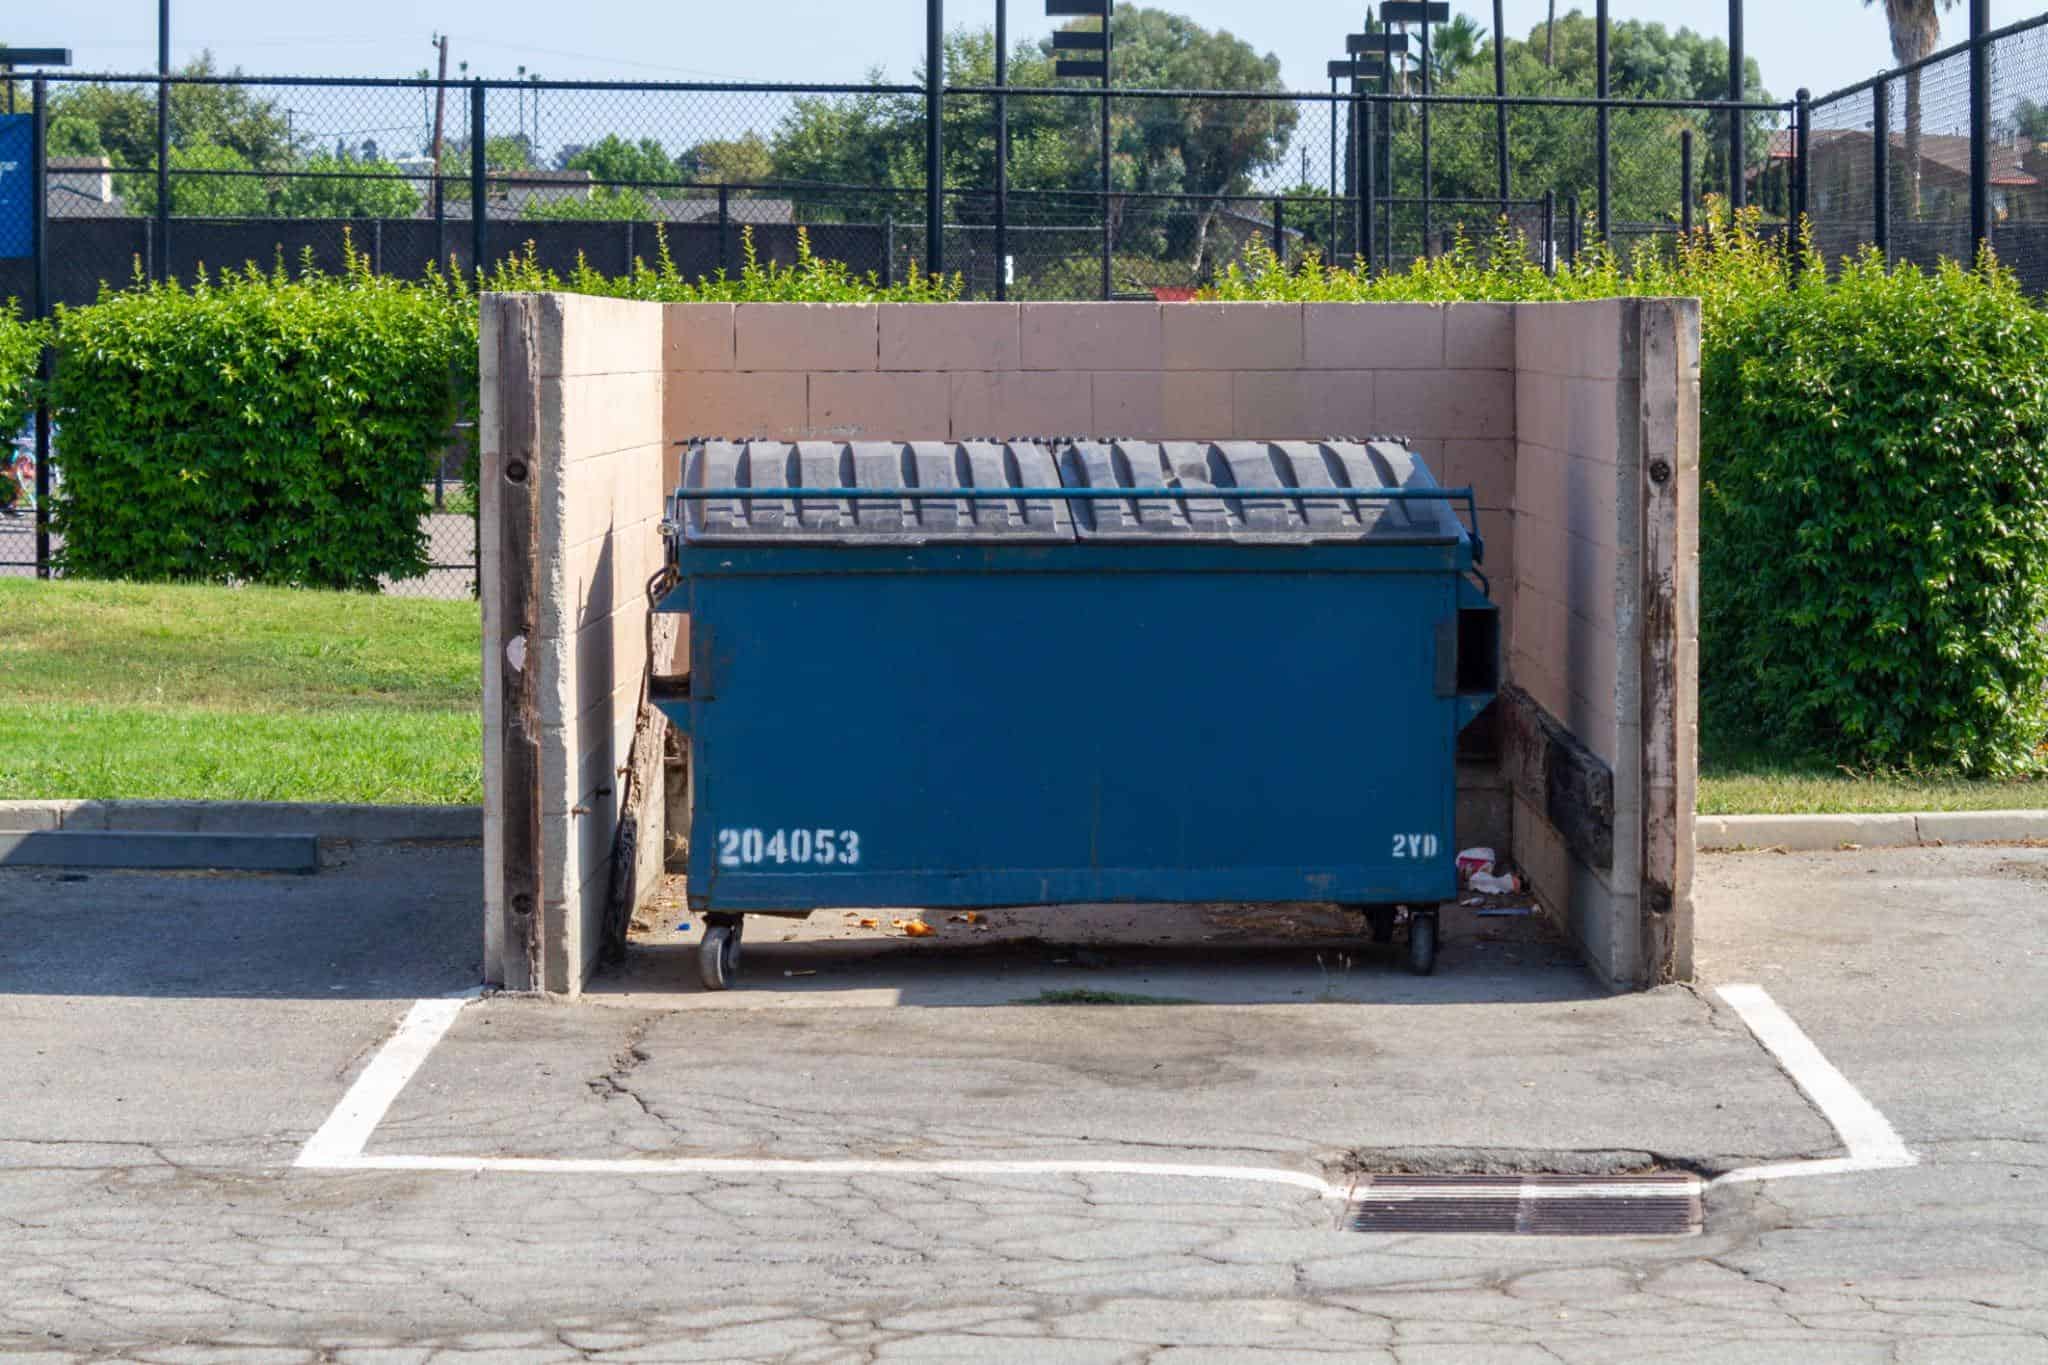 Dumpster Rental Helps with Property Cleanup